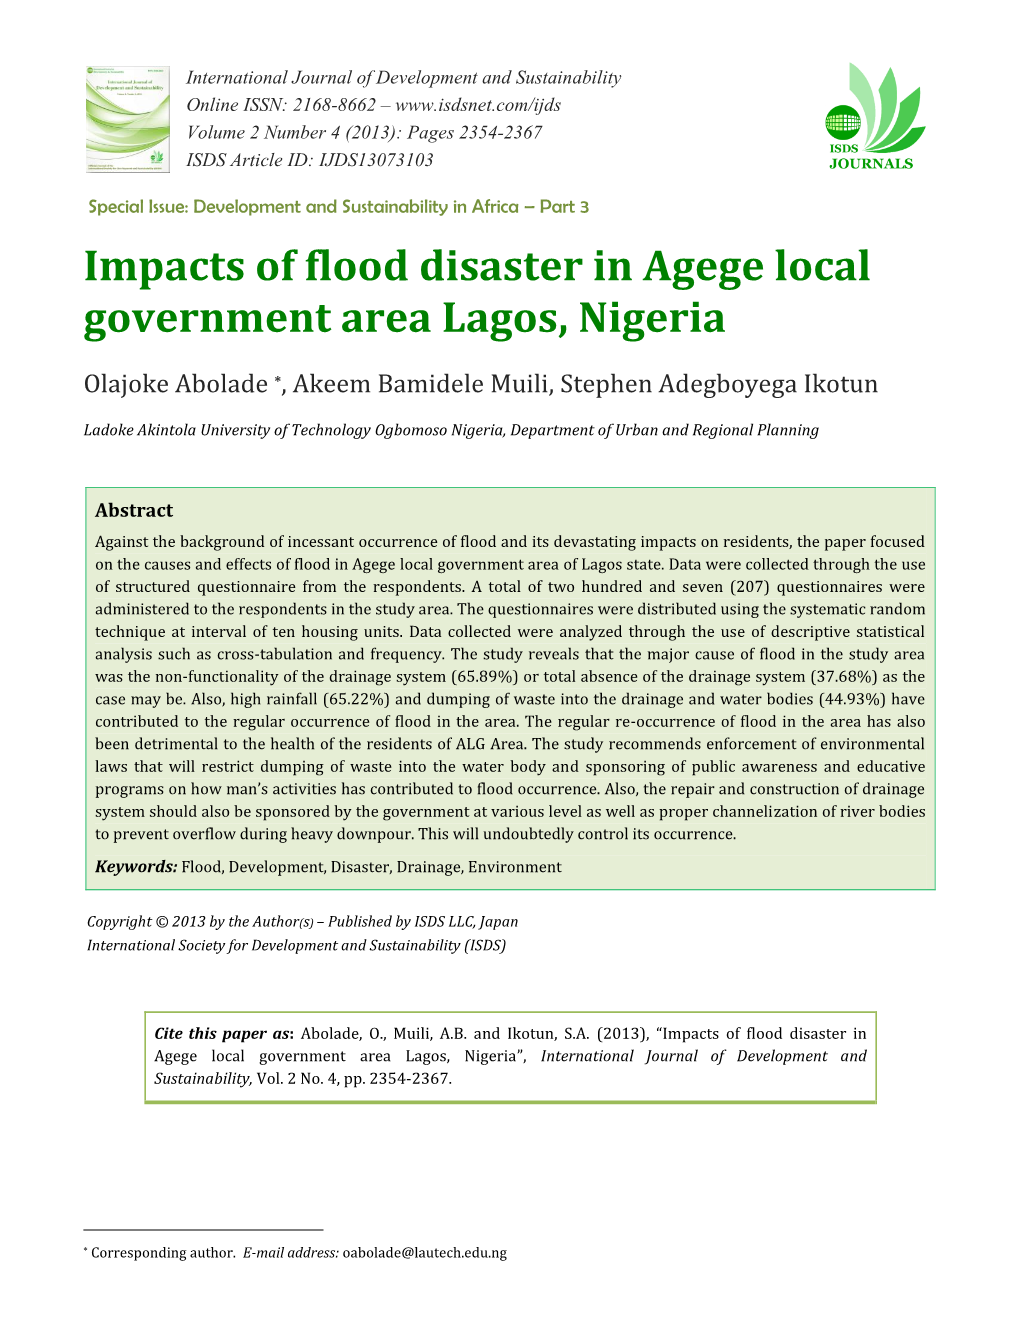 Impacts of Flood Disaster in Agege Local Government Area Lagos, Nigeria